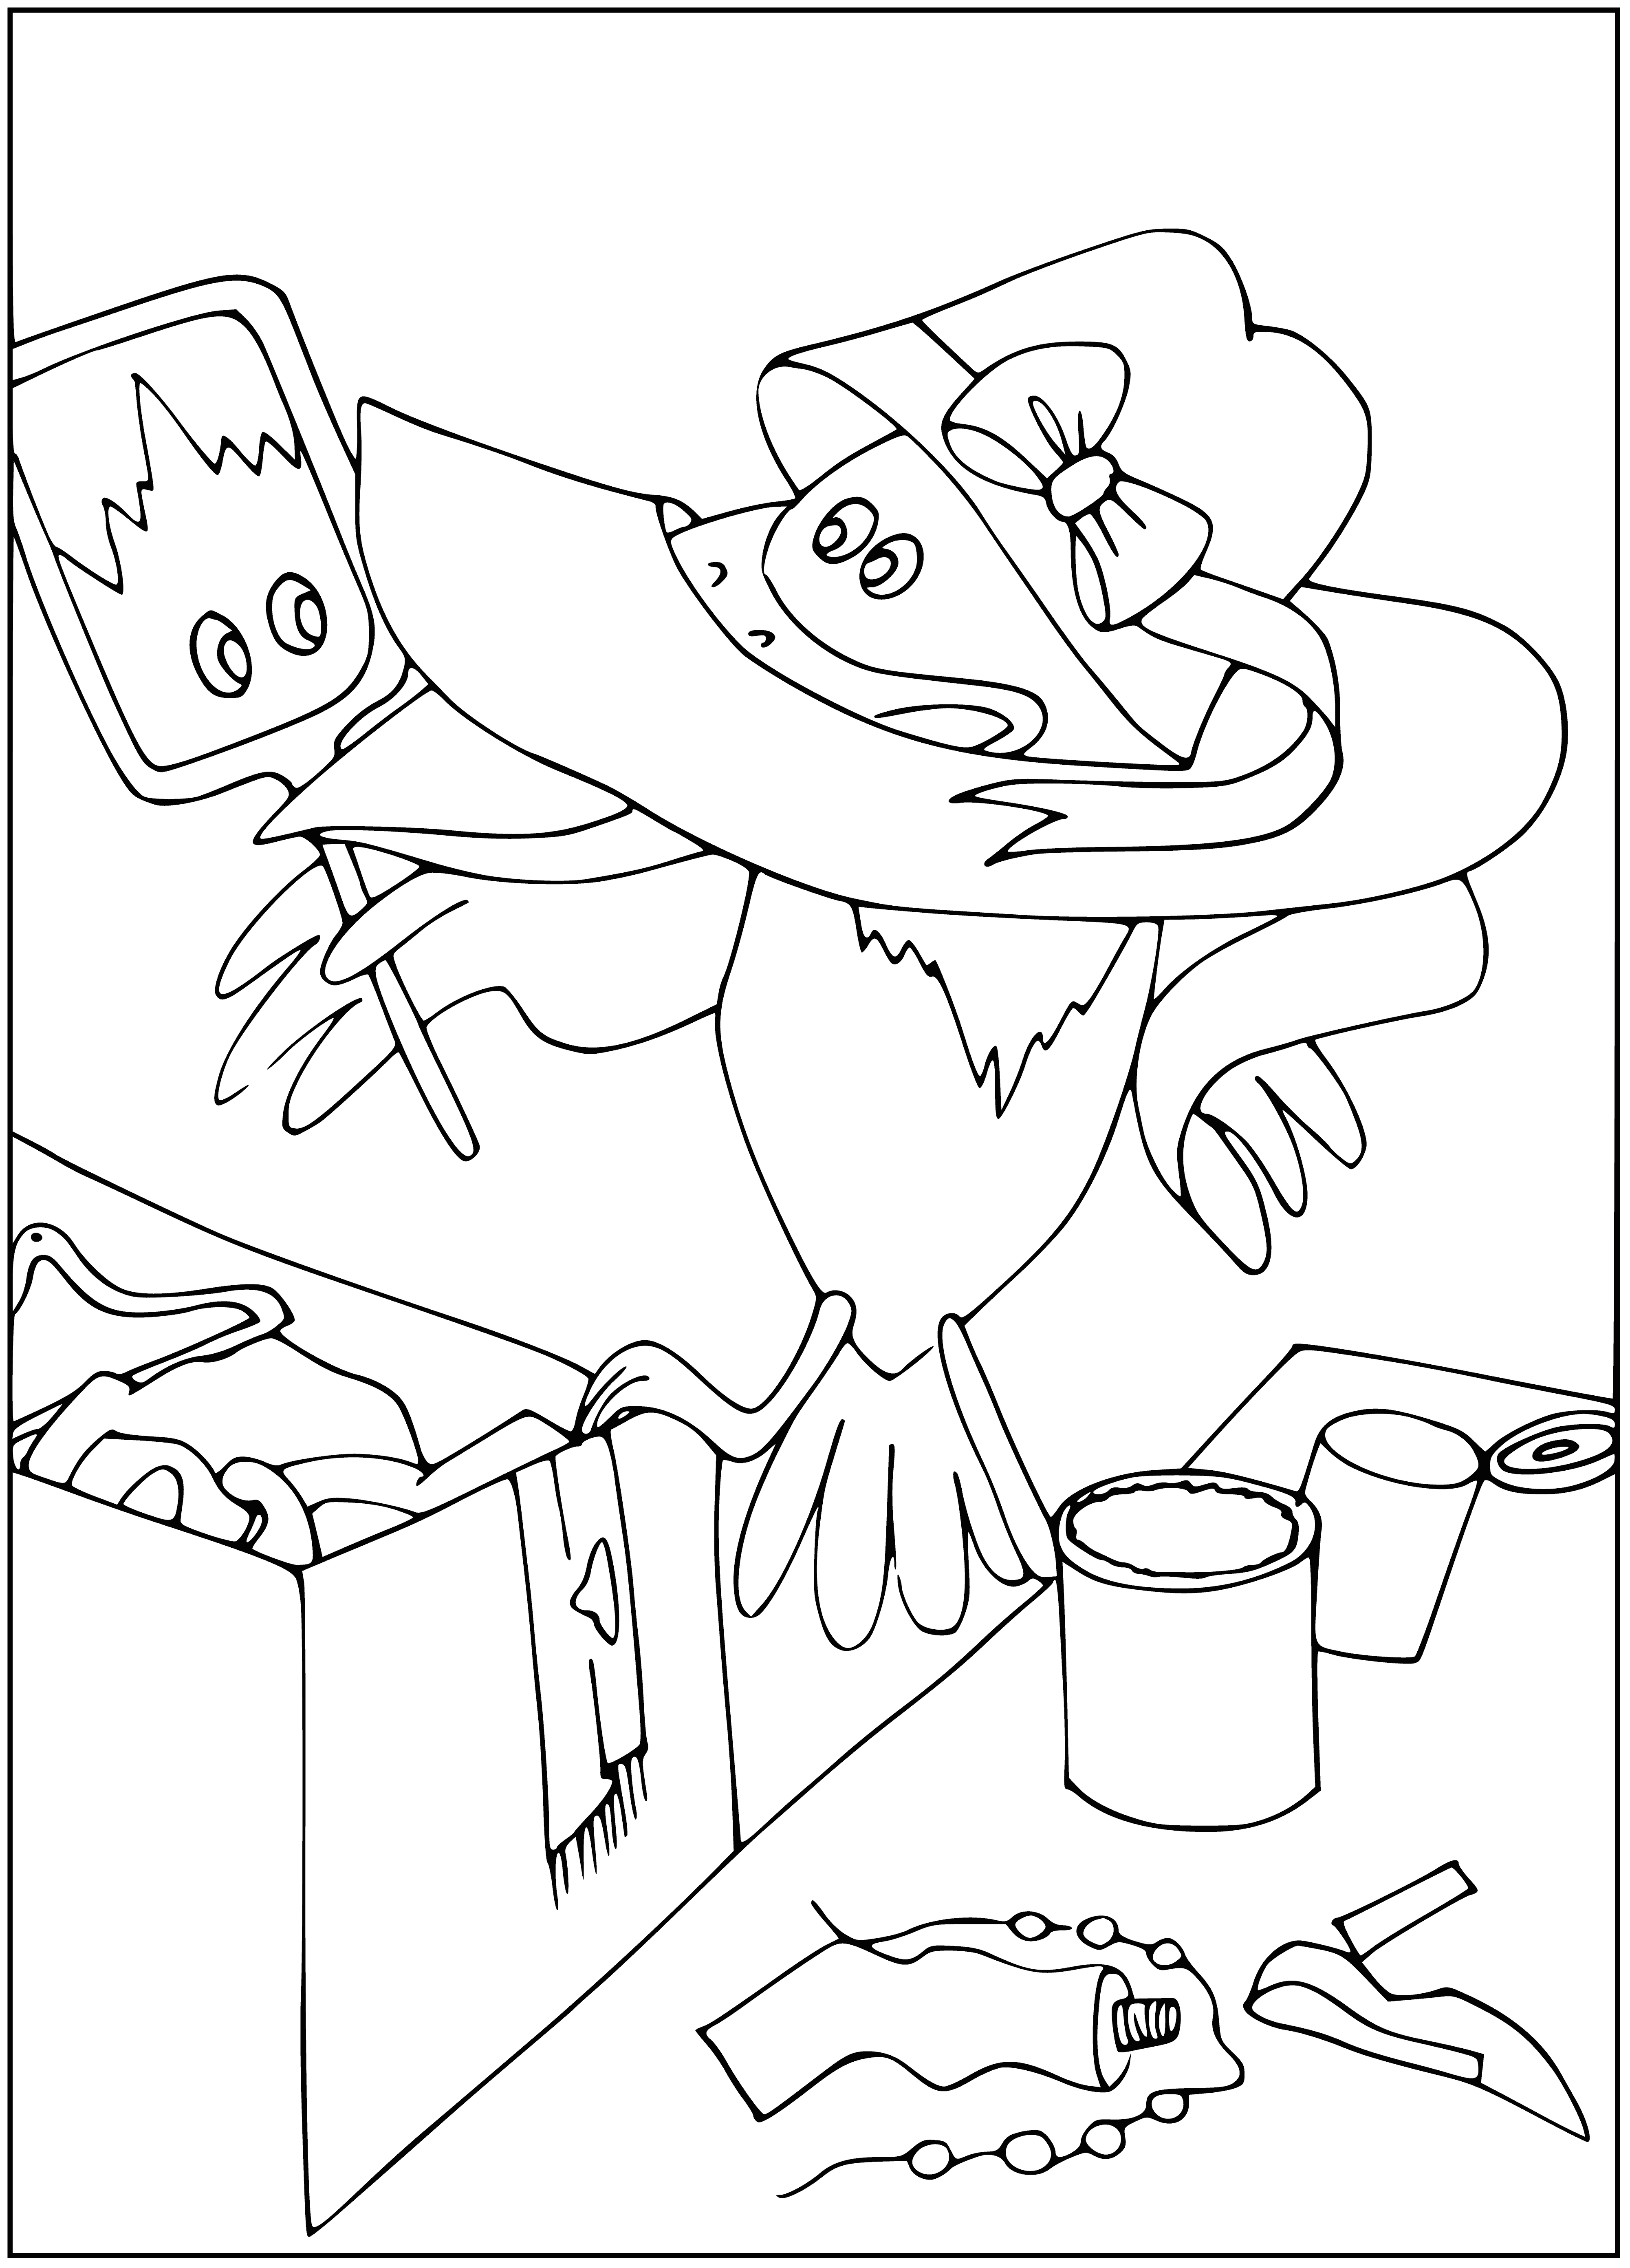 coloring page: Prodigal crow returns home to old friends, joyfully reunited.